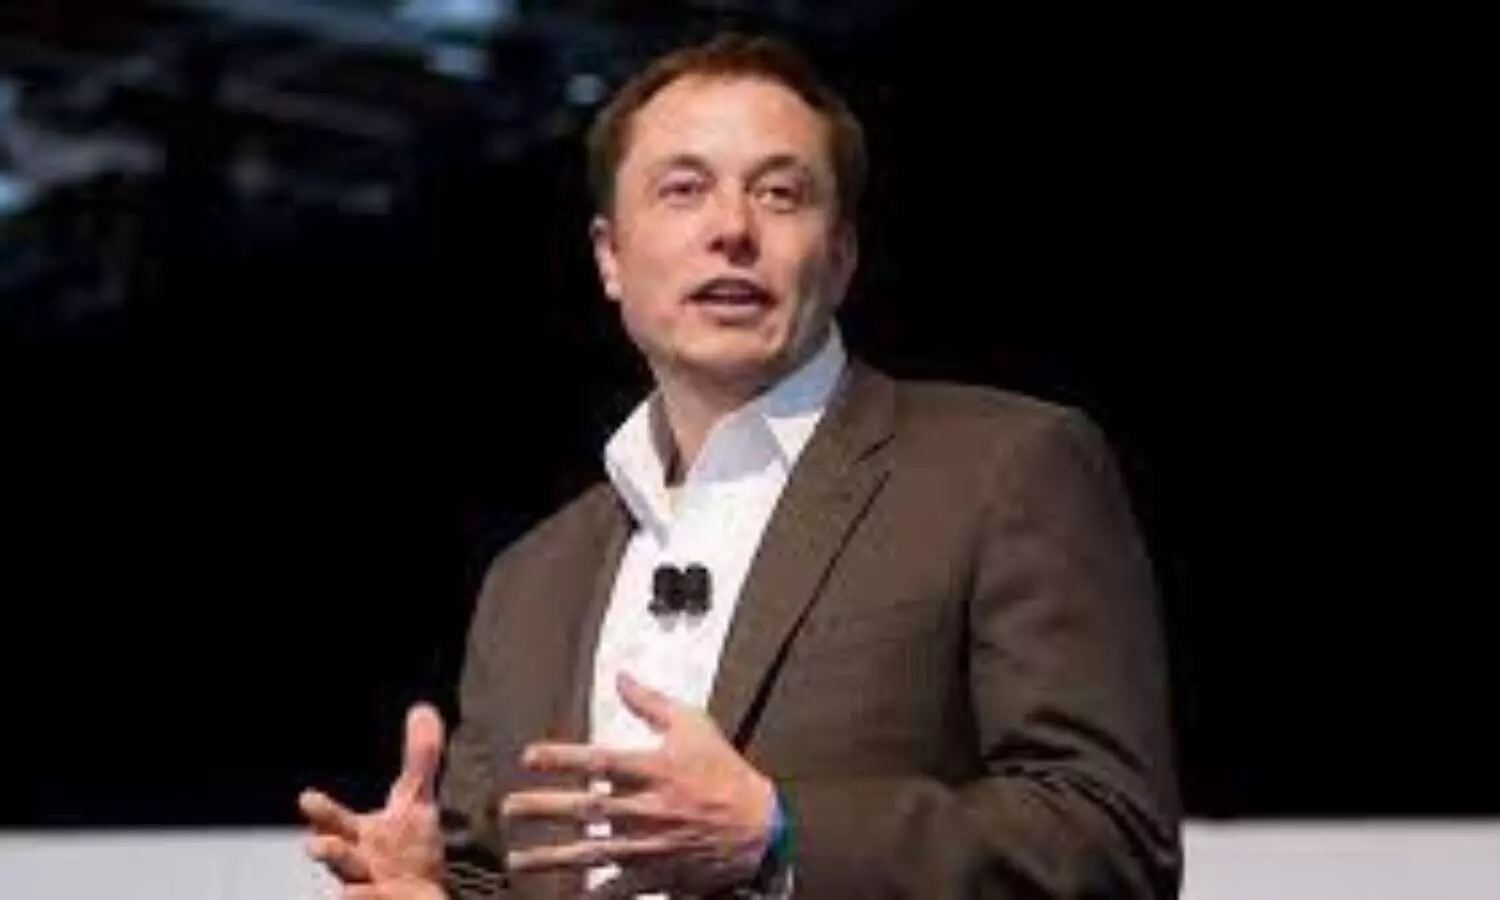 Report: Elon Musk slashes Twitter employees parental leaves from 20 weeks to 14 days